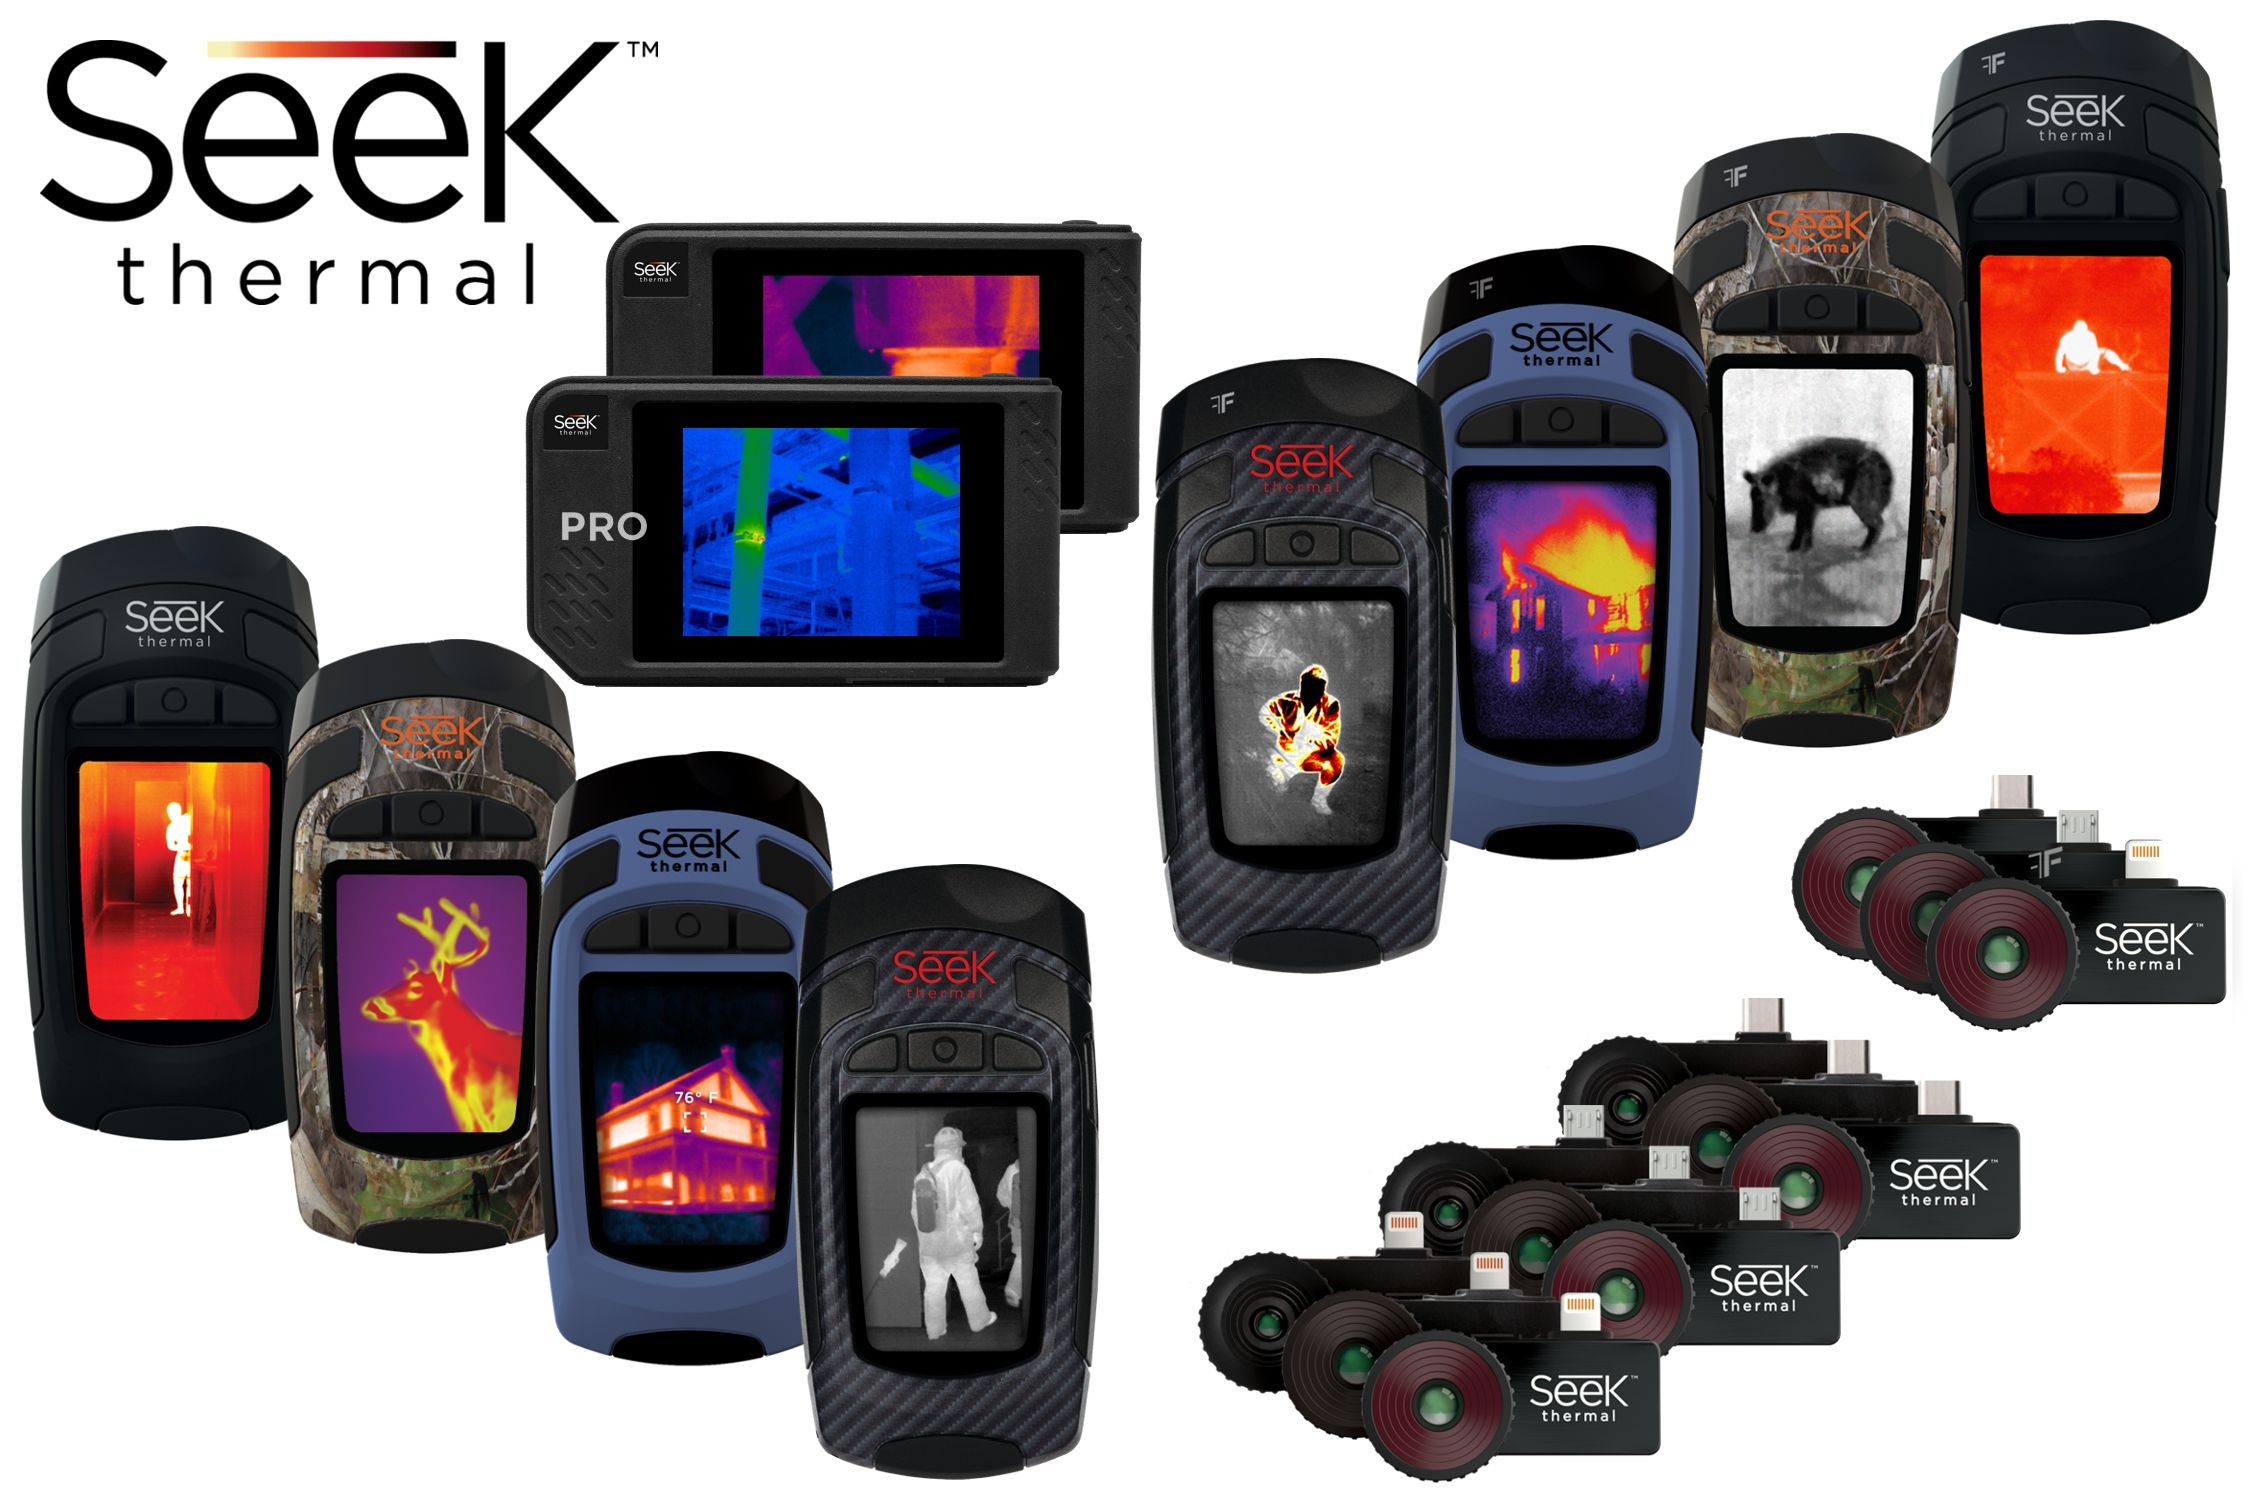 Seek Thermal Compact Android micro USB Thermal imaging camera UW-EAA_15